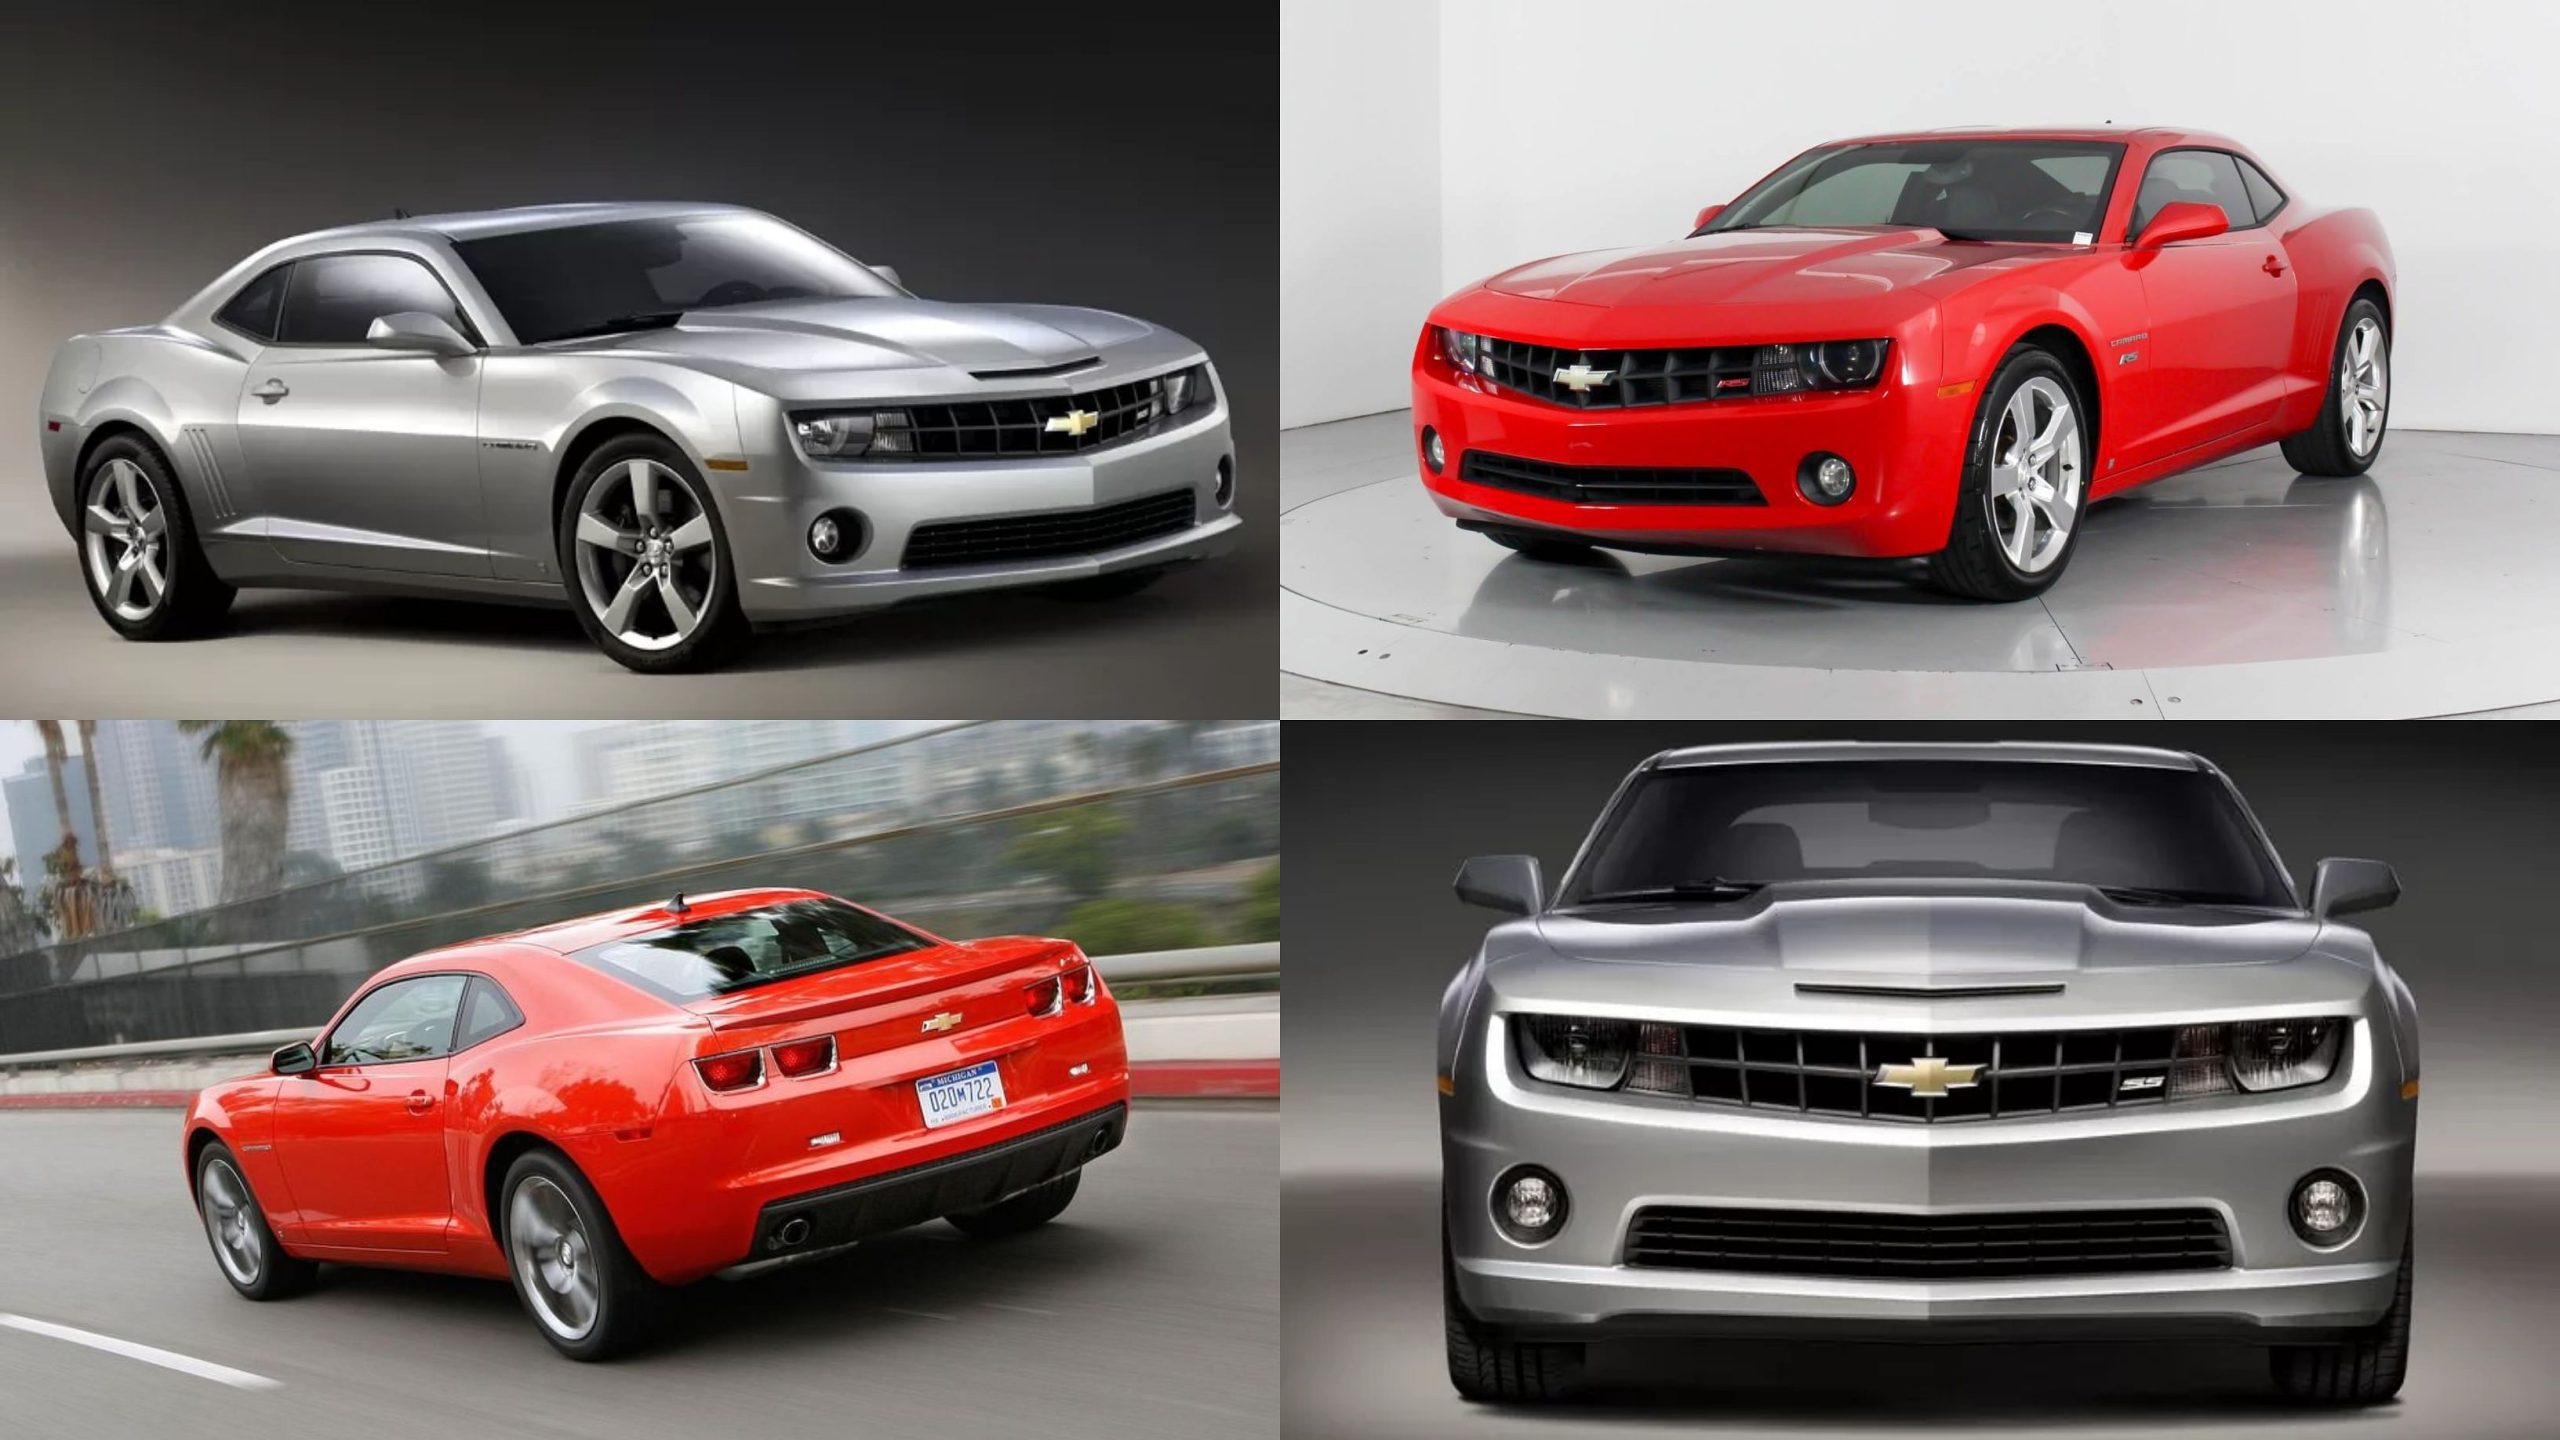 Know All The Exceptional Features of the 2010 Chevrolet Camaro RS/SS HTR750